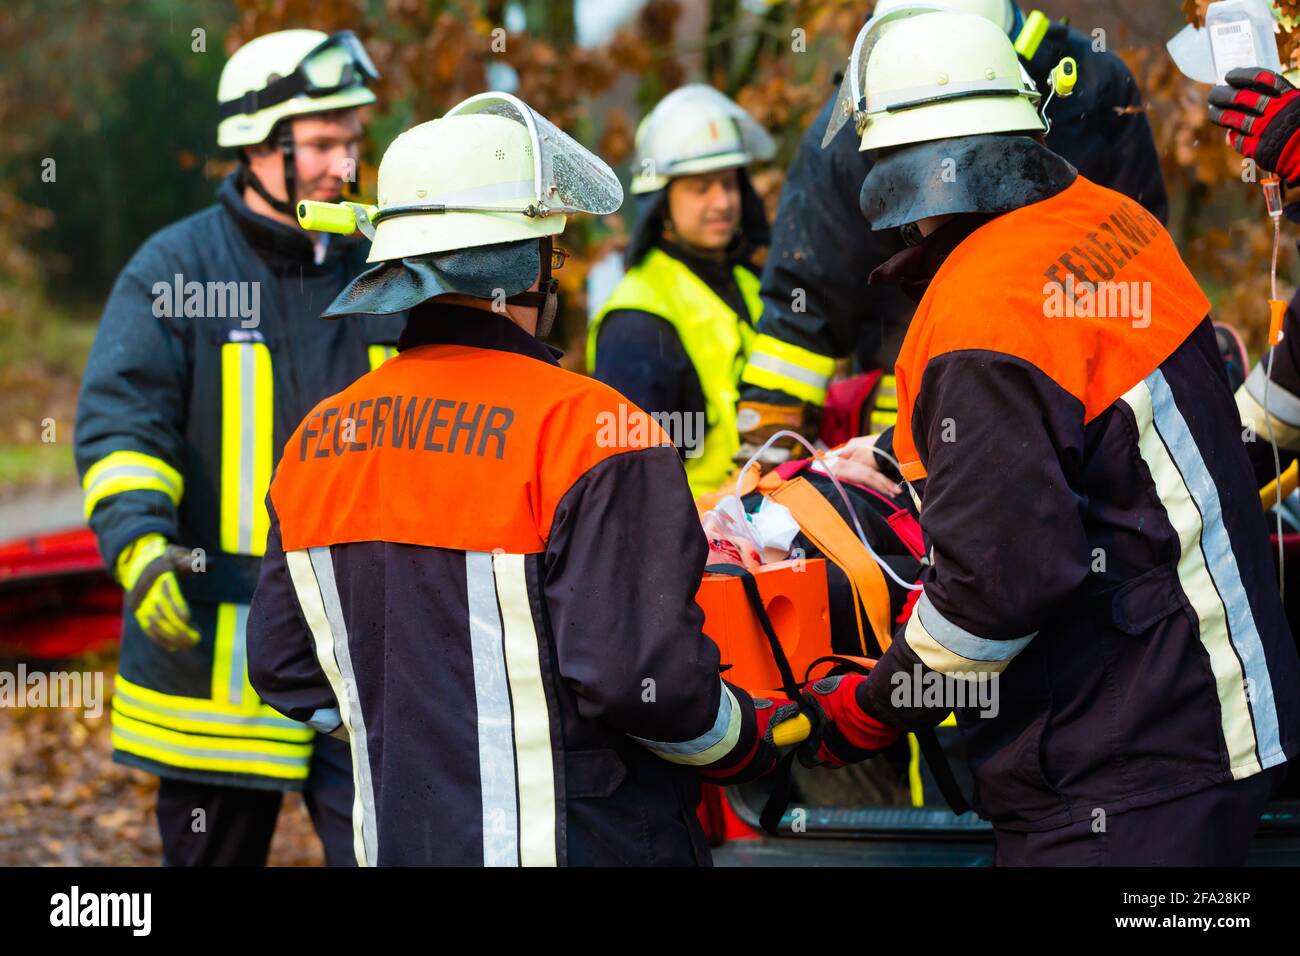 Accident - Fire brigade and Rescue team pulling cart with wounded person wearing a neck brace and respirator Stock Photo